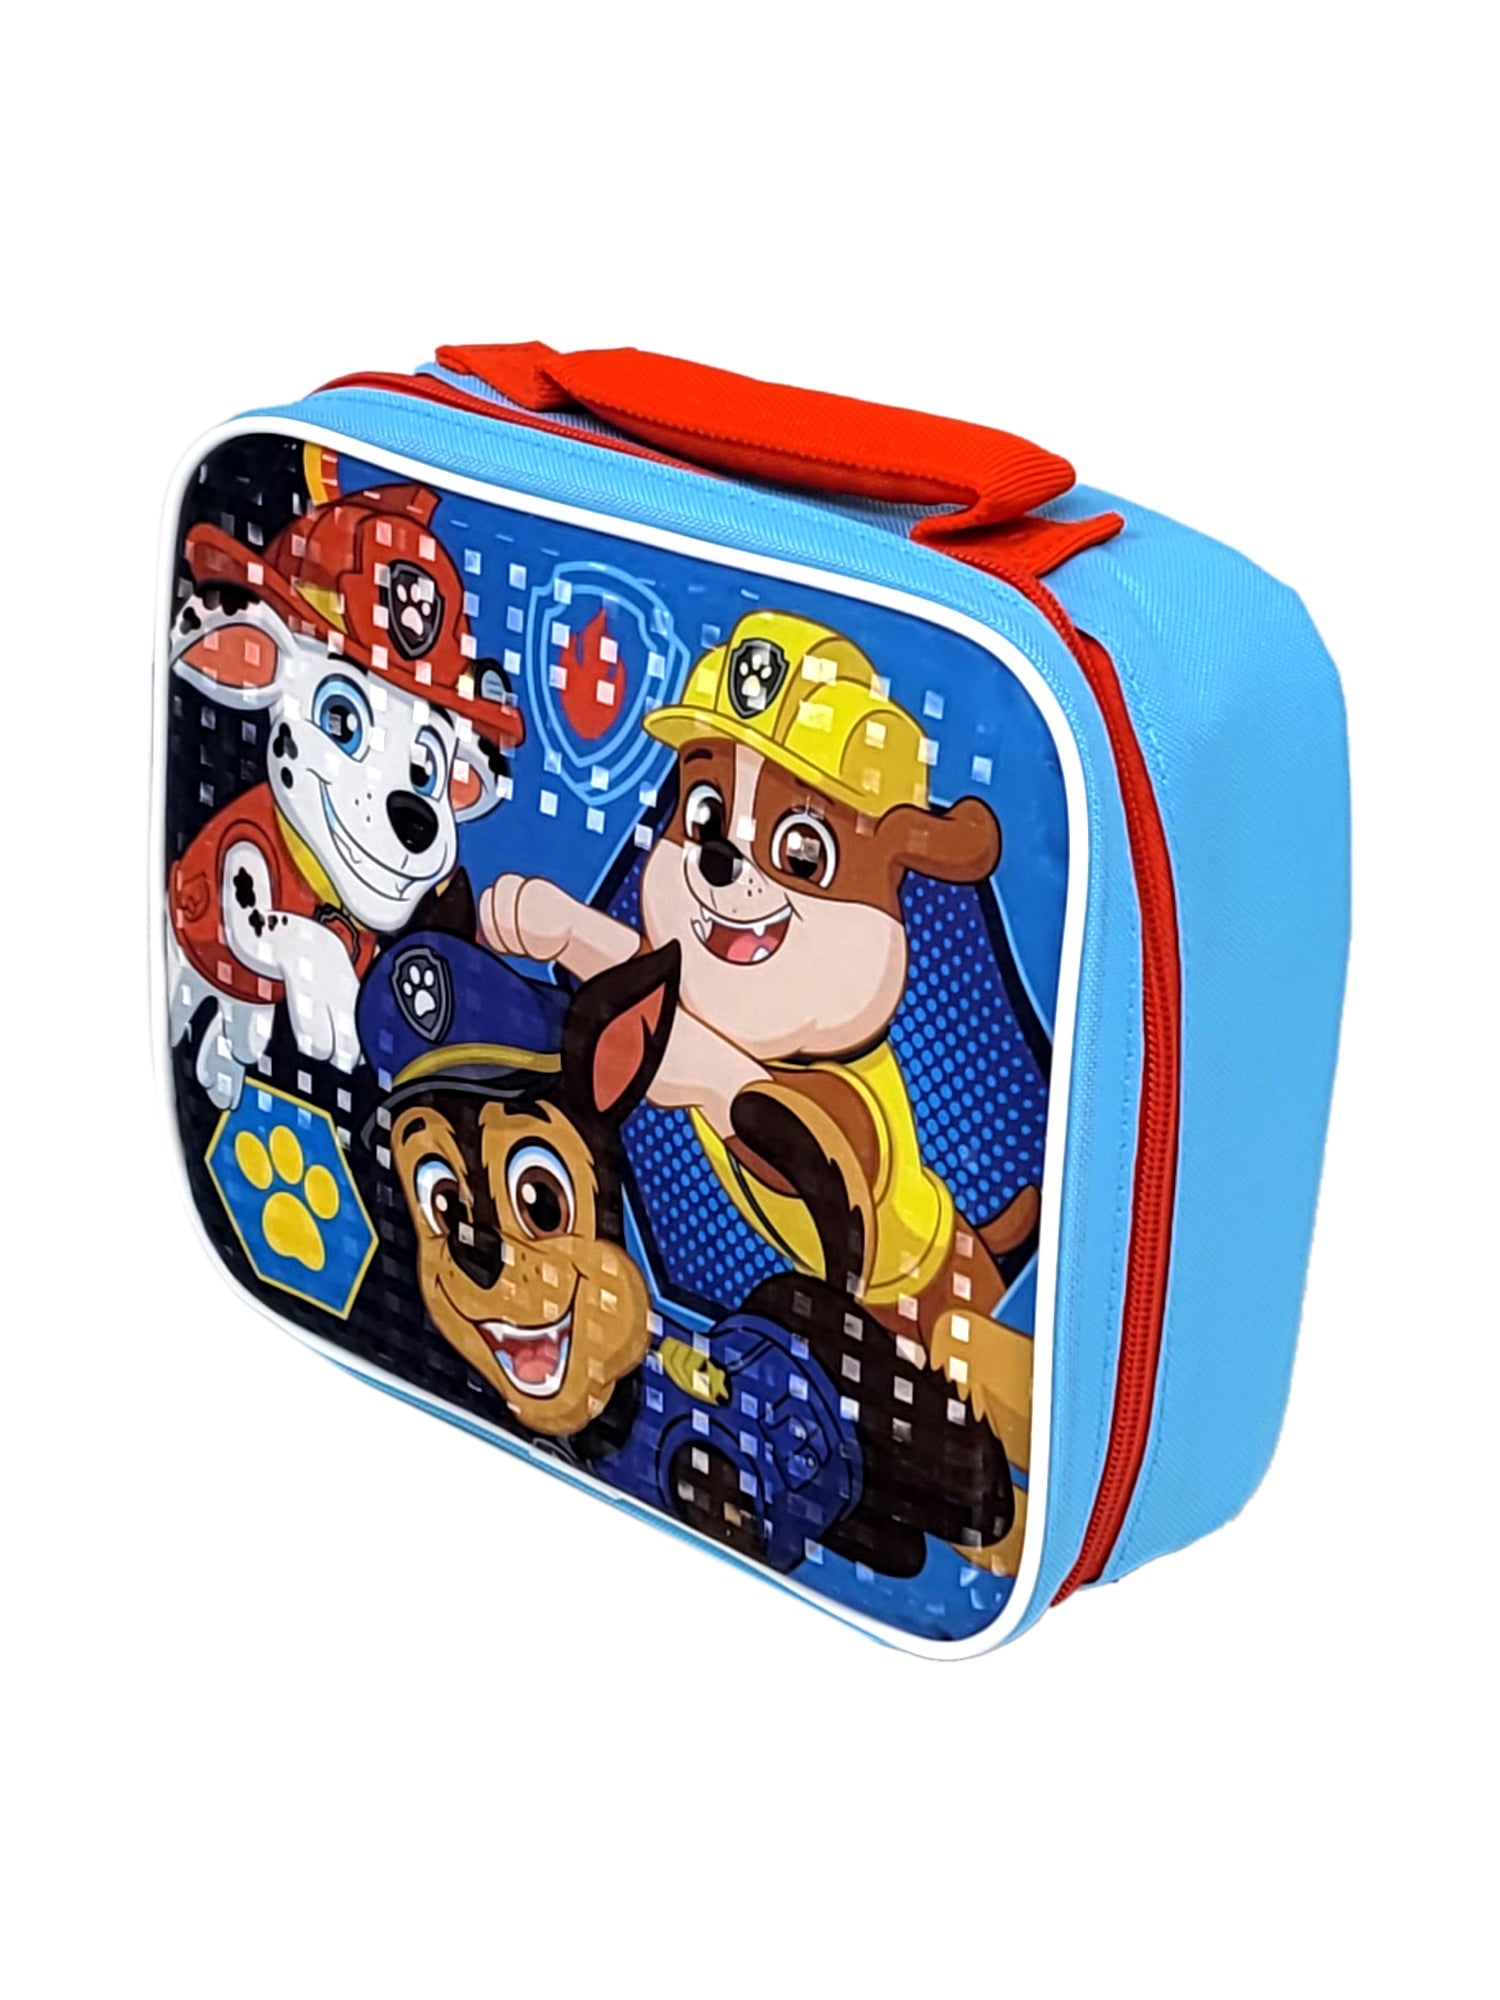 Boys Paw Patrol Chase Marshall Rubble Insulated Lunch Bag